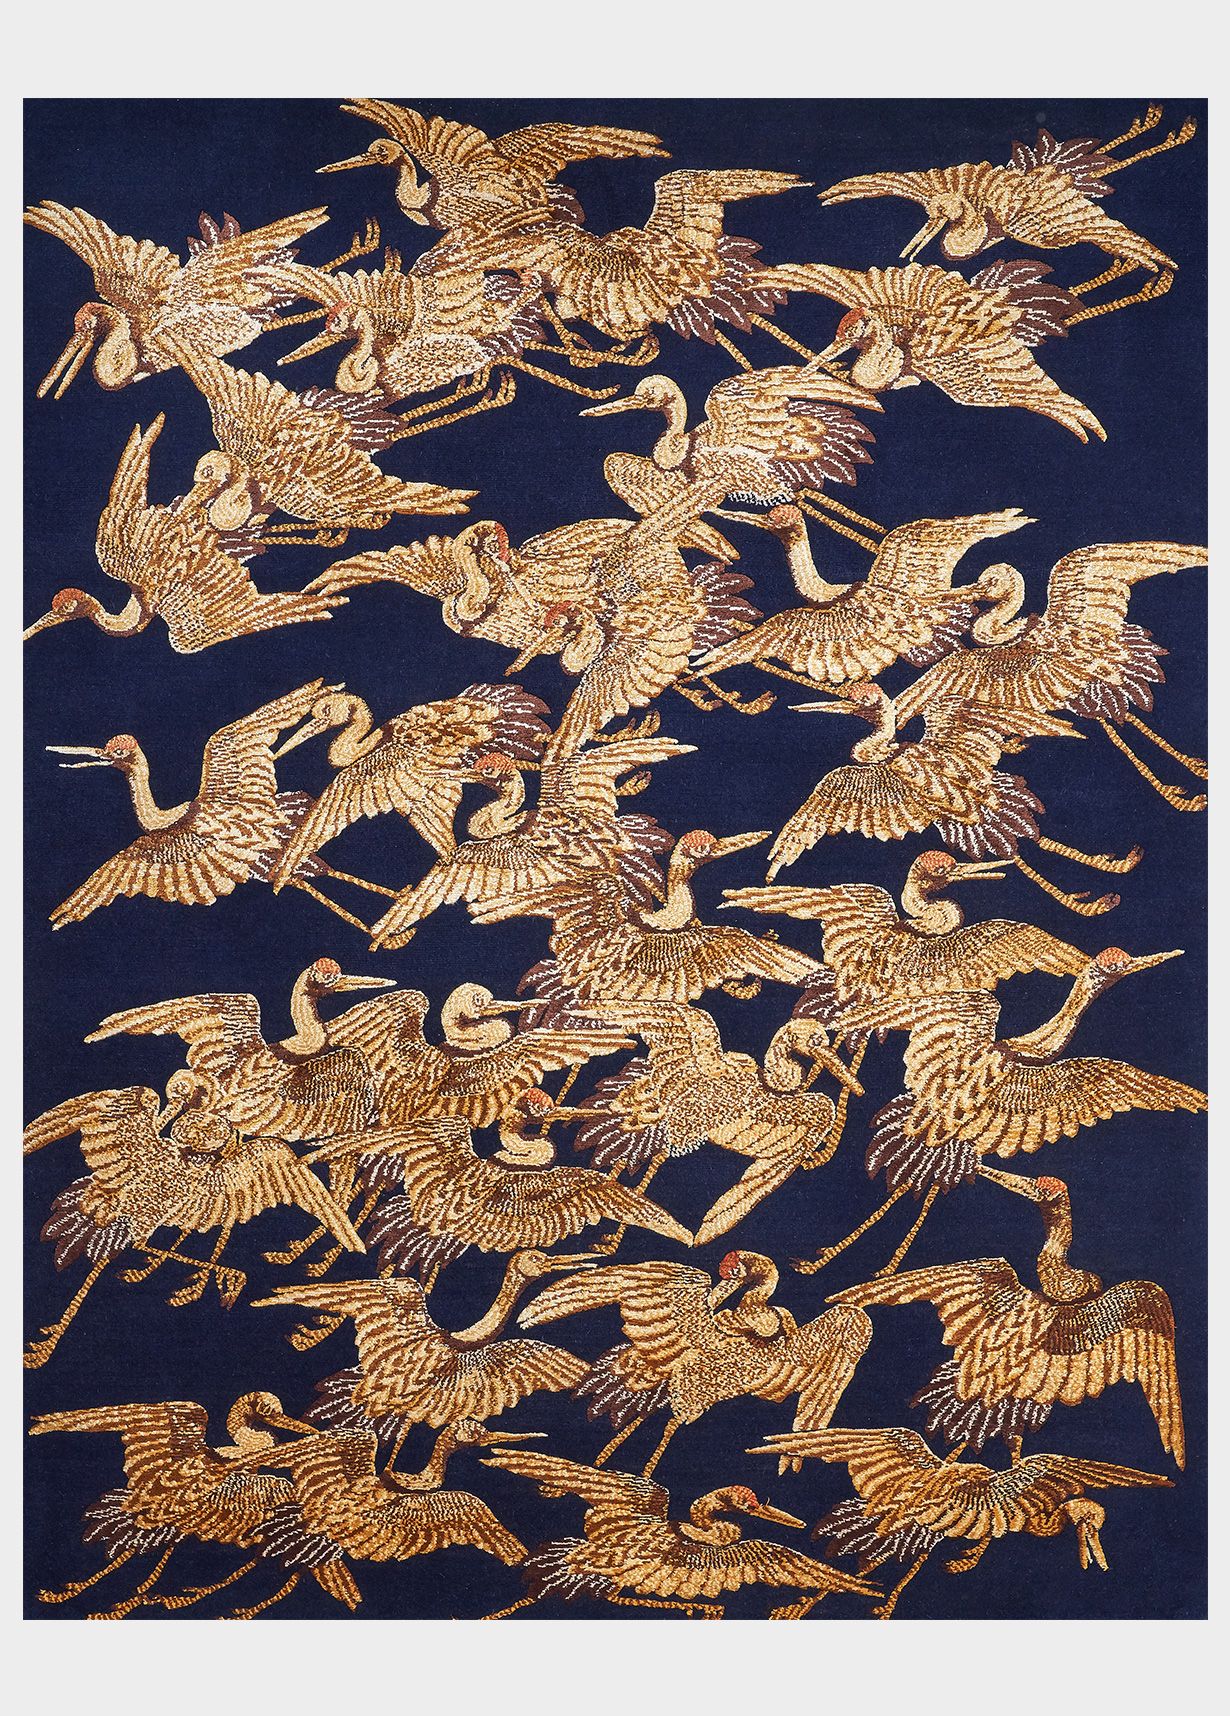 Cranes from the V&A Rug Collection